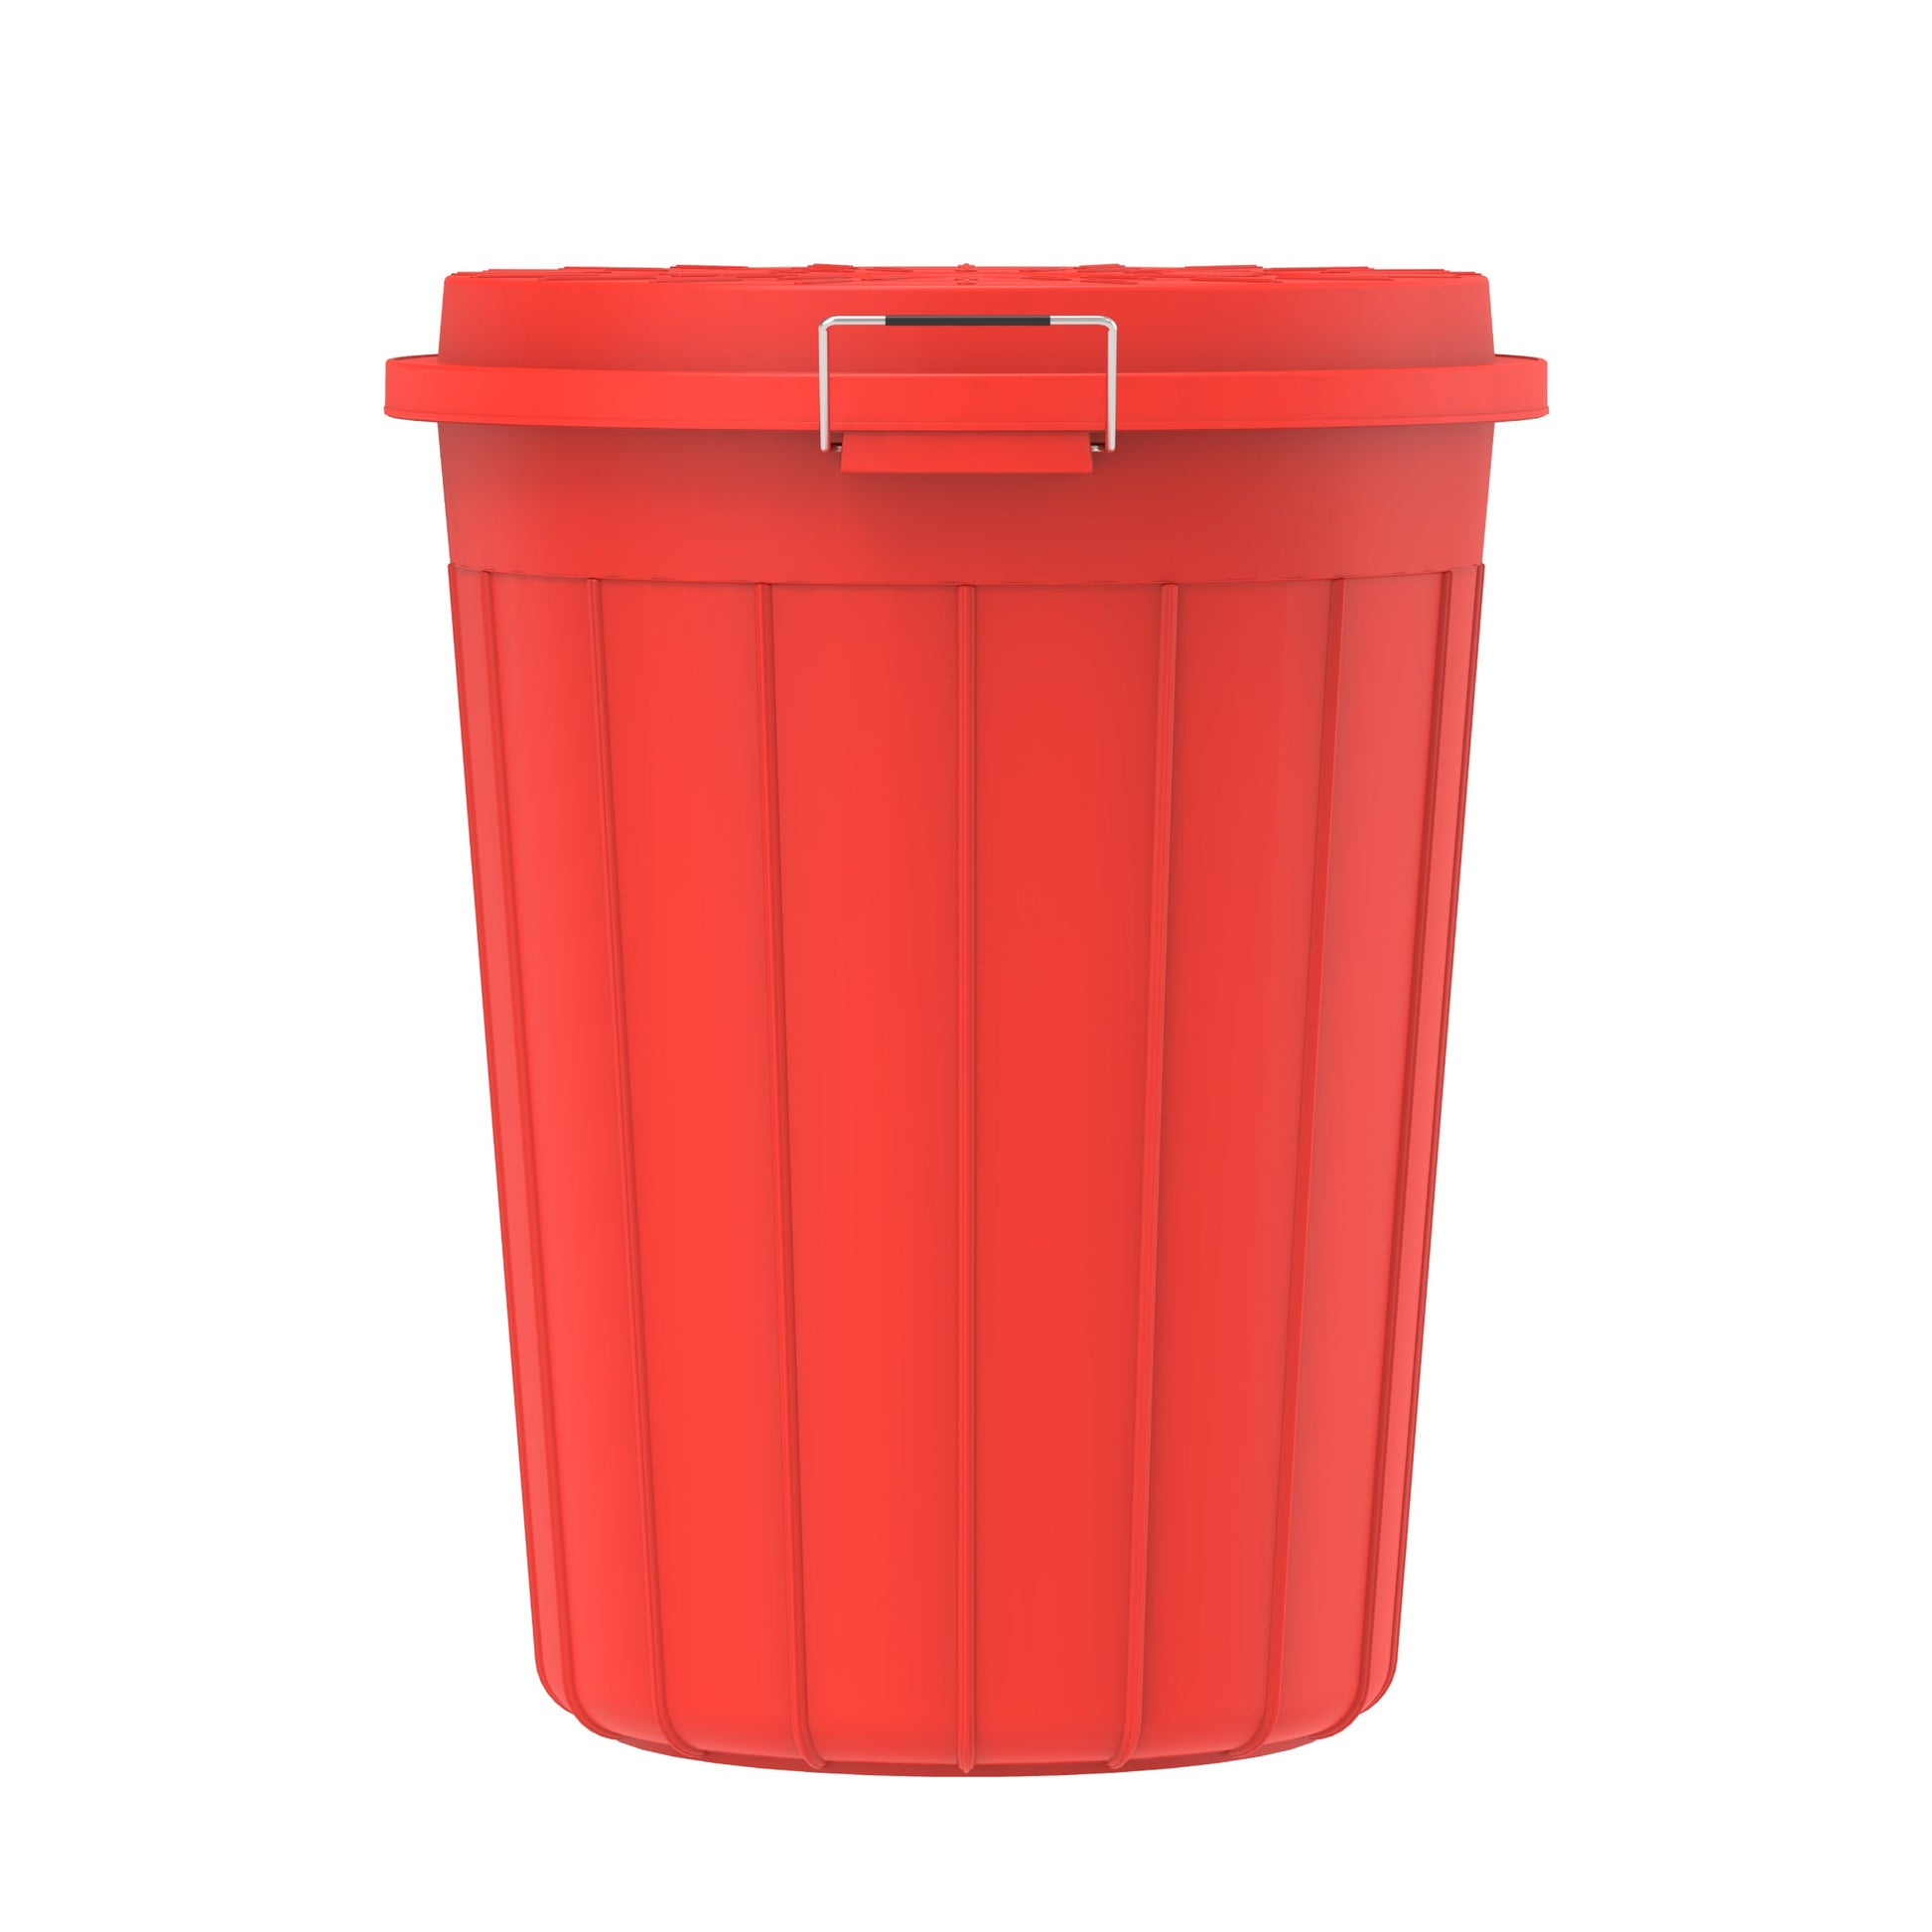 125L Round Plastic Drums with Lid - Cosmoplast Bahrain